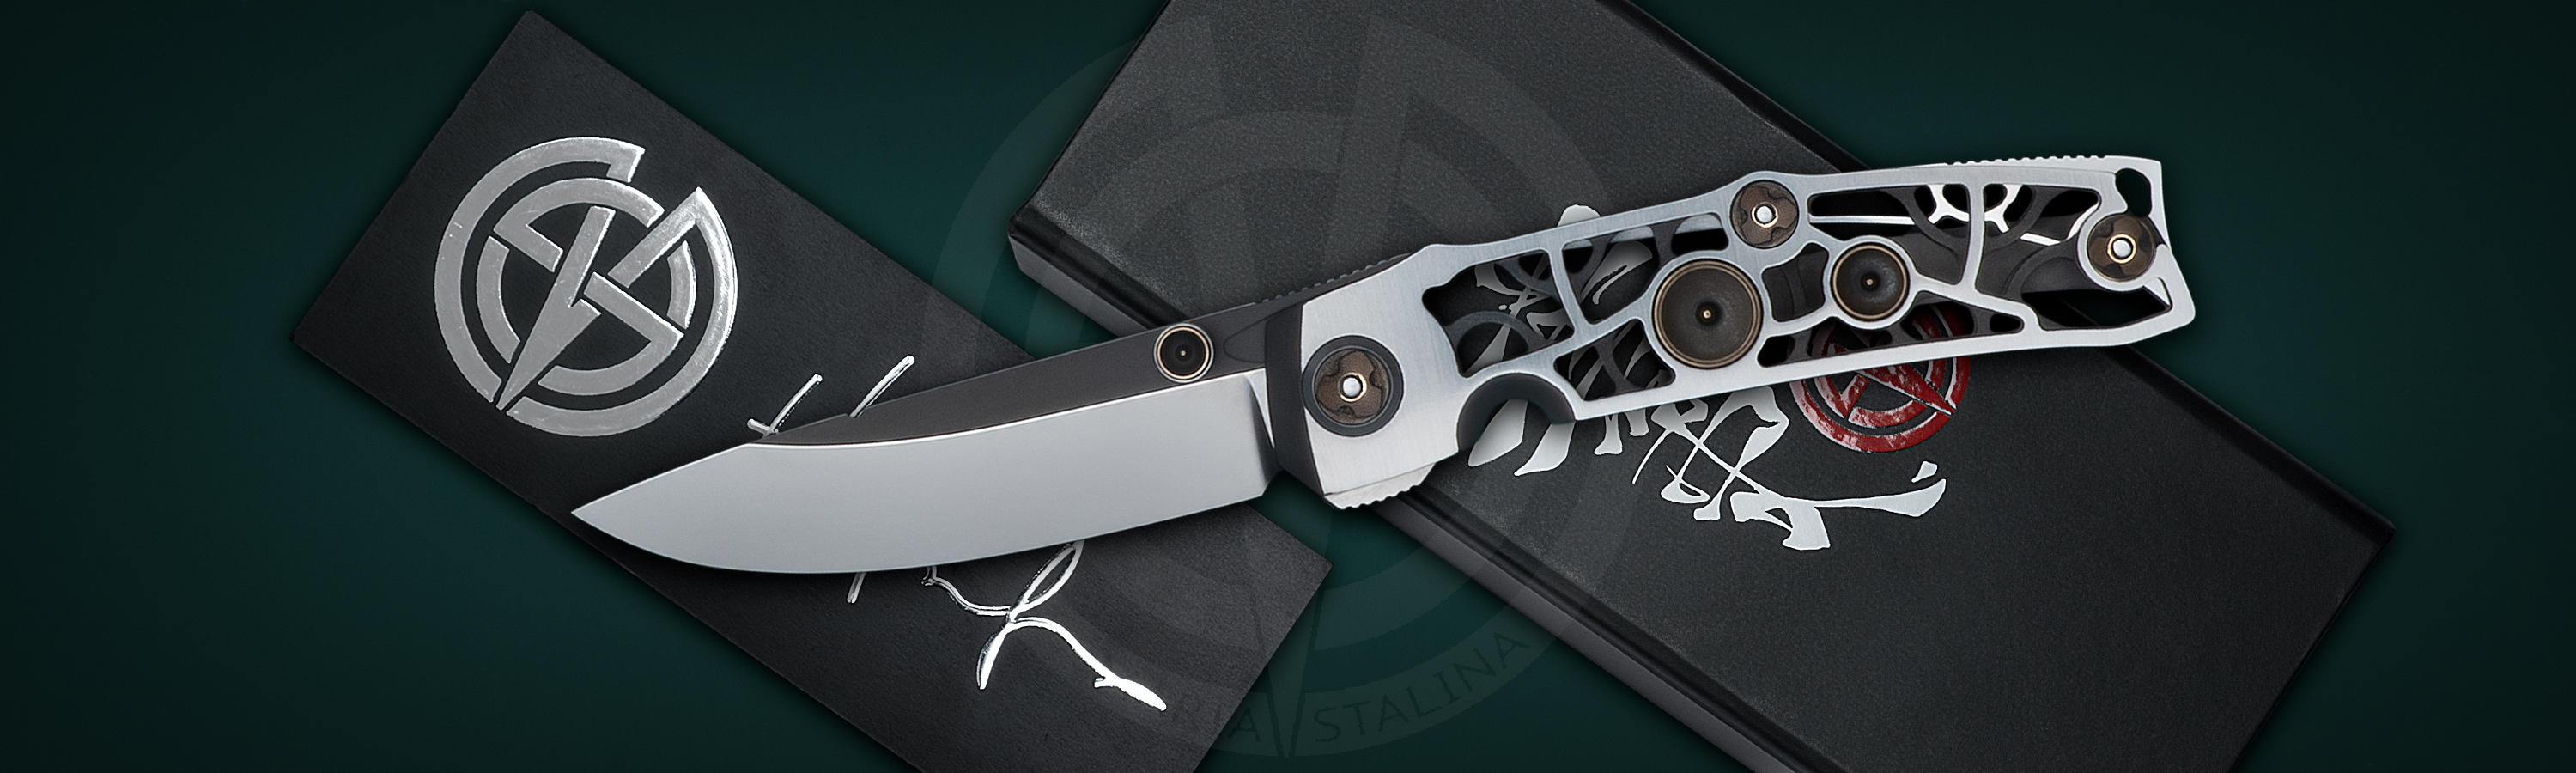 The knife Greta Oto by Manufactory S&L with branded box